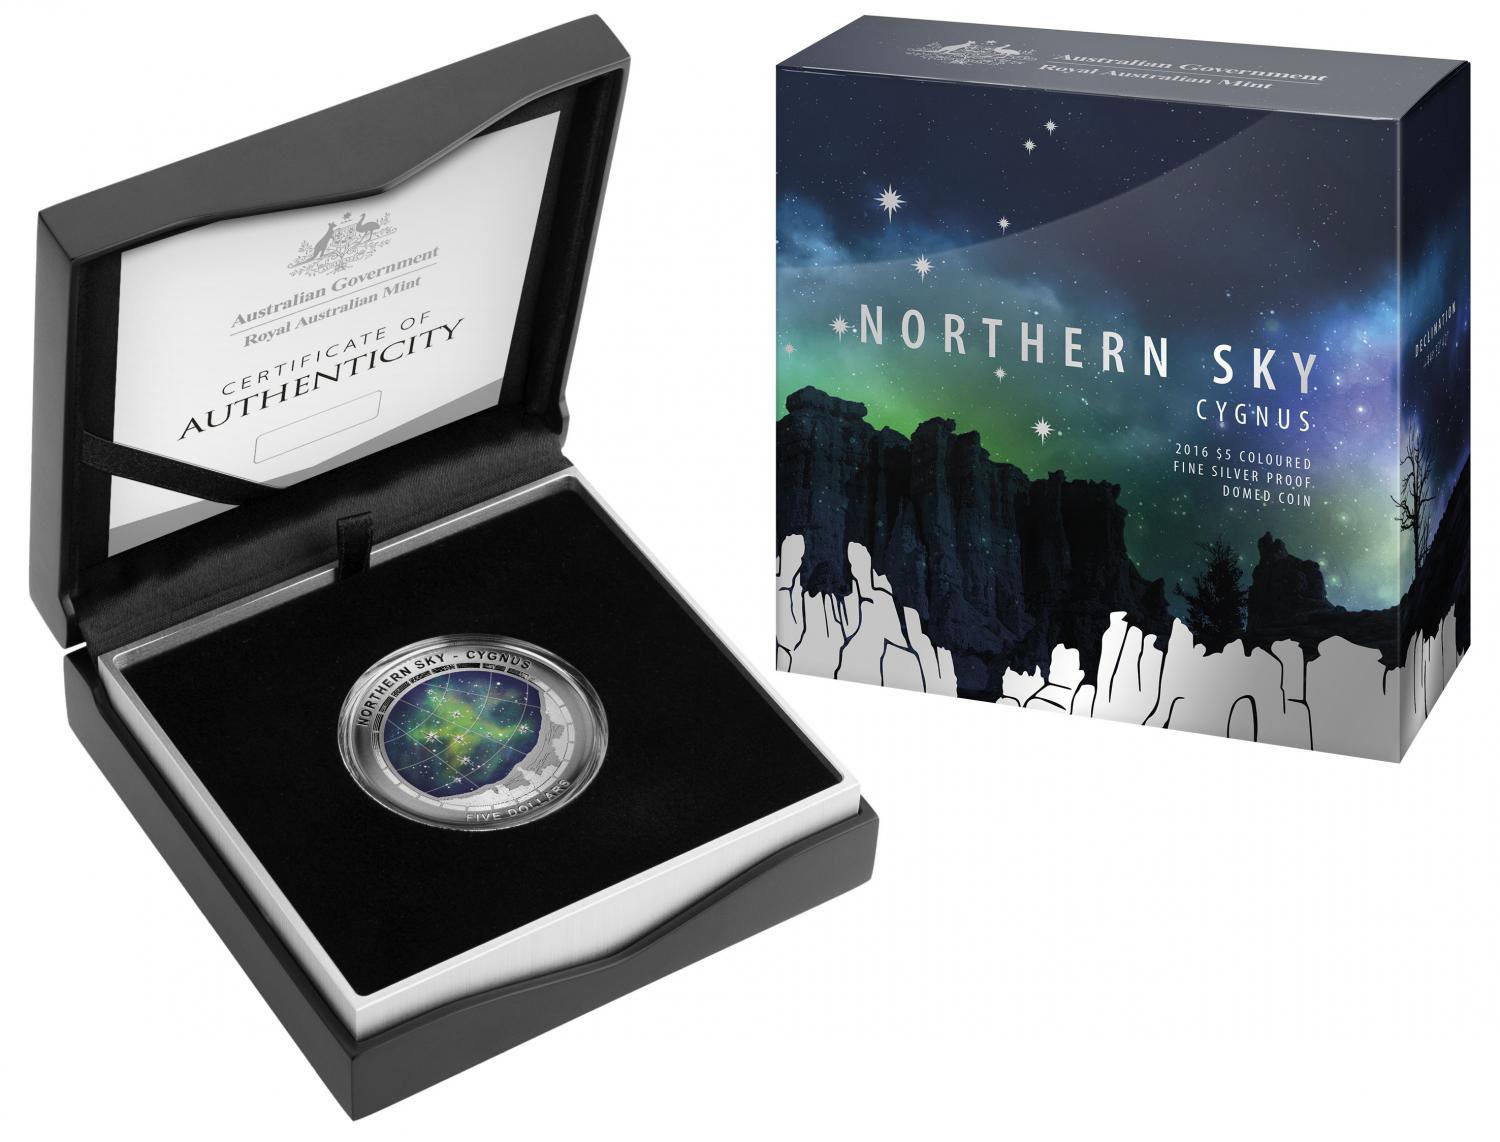 Thumbnail for 2016 Northern Sky Cygnus Silver Proof Domed Coin